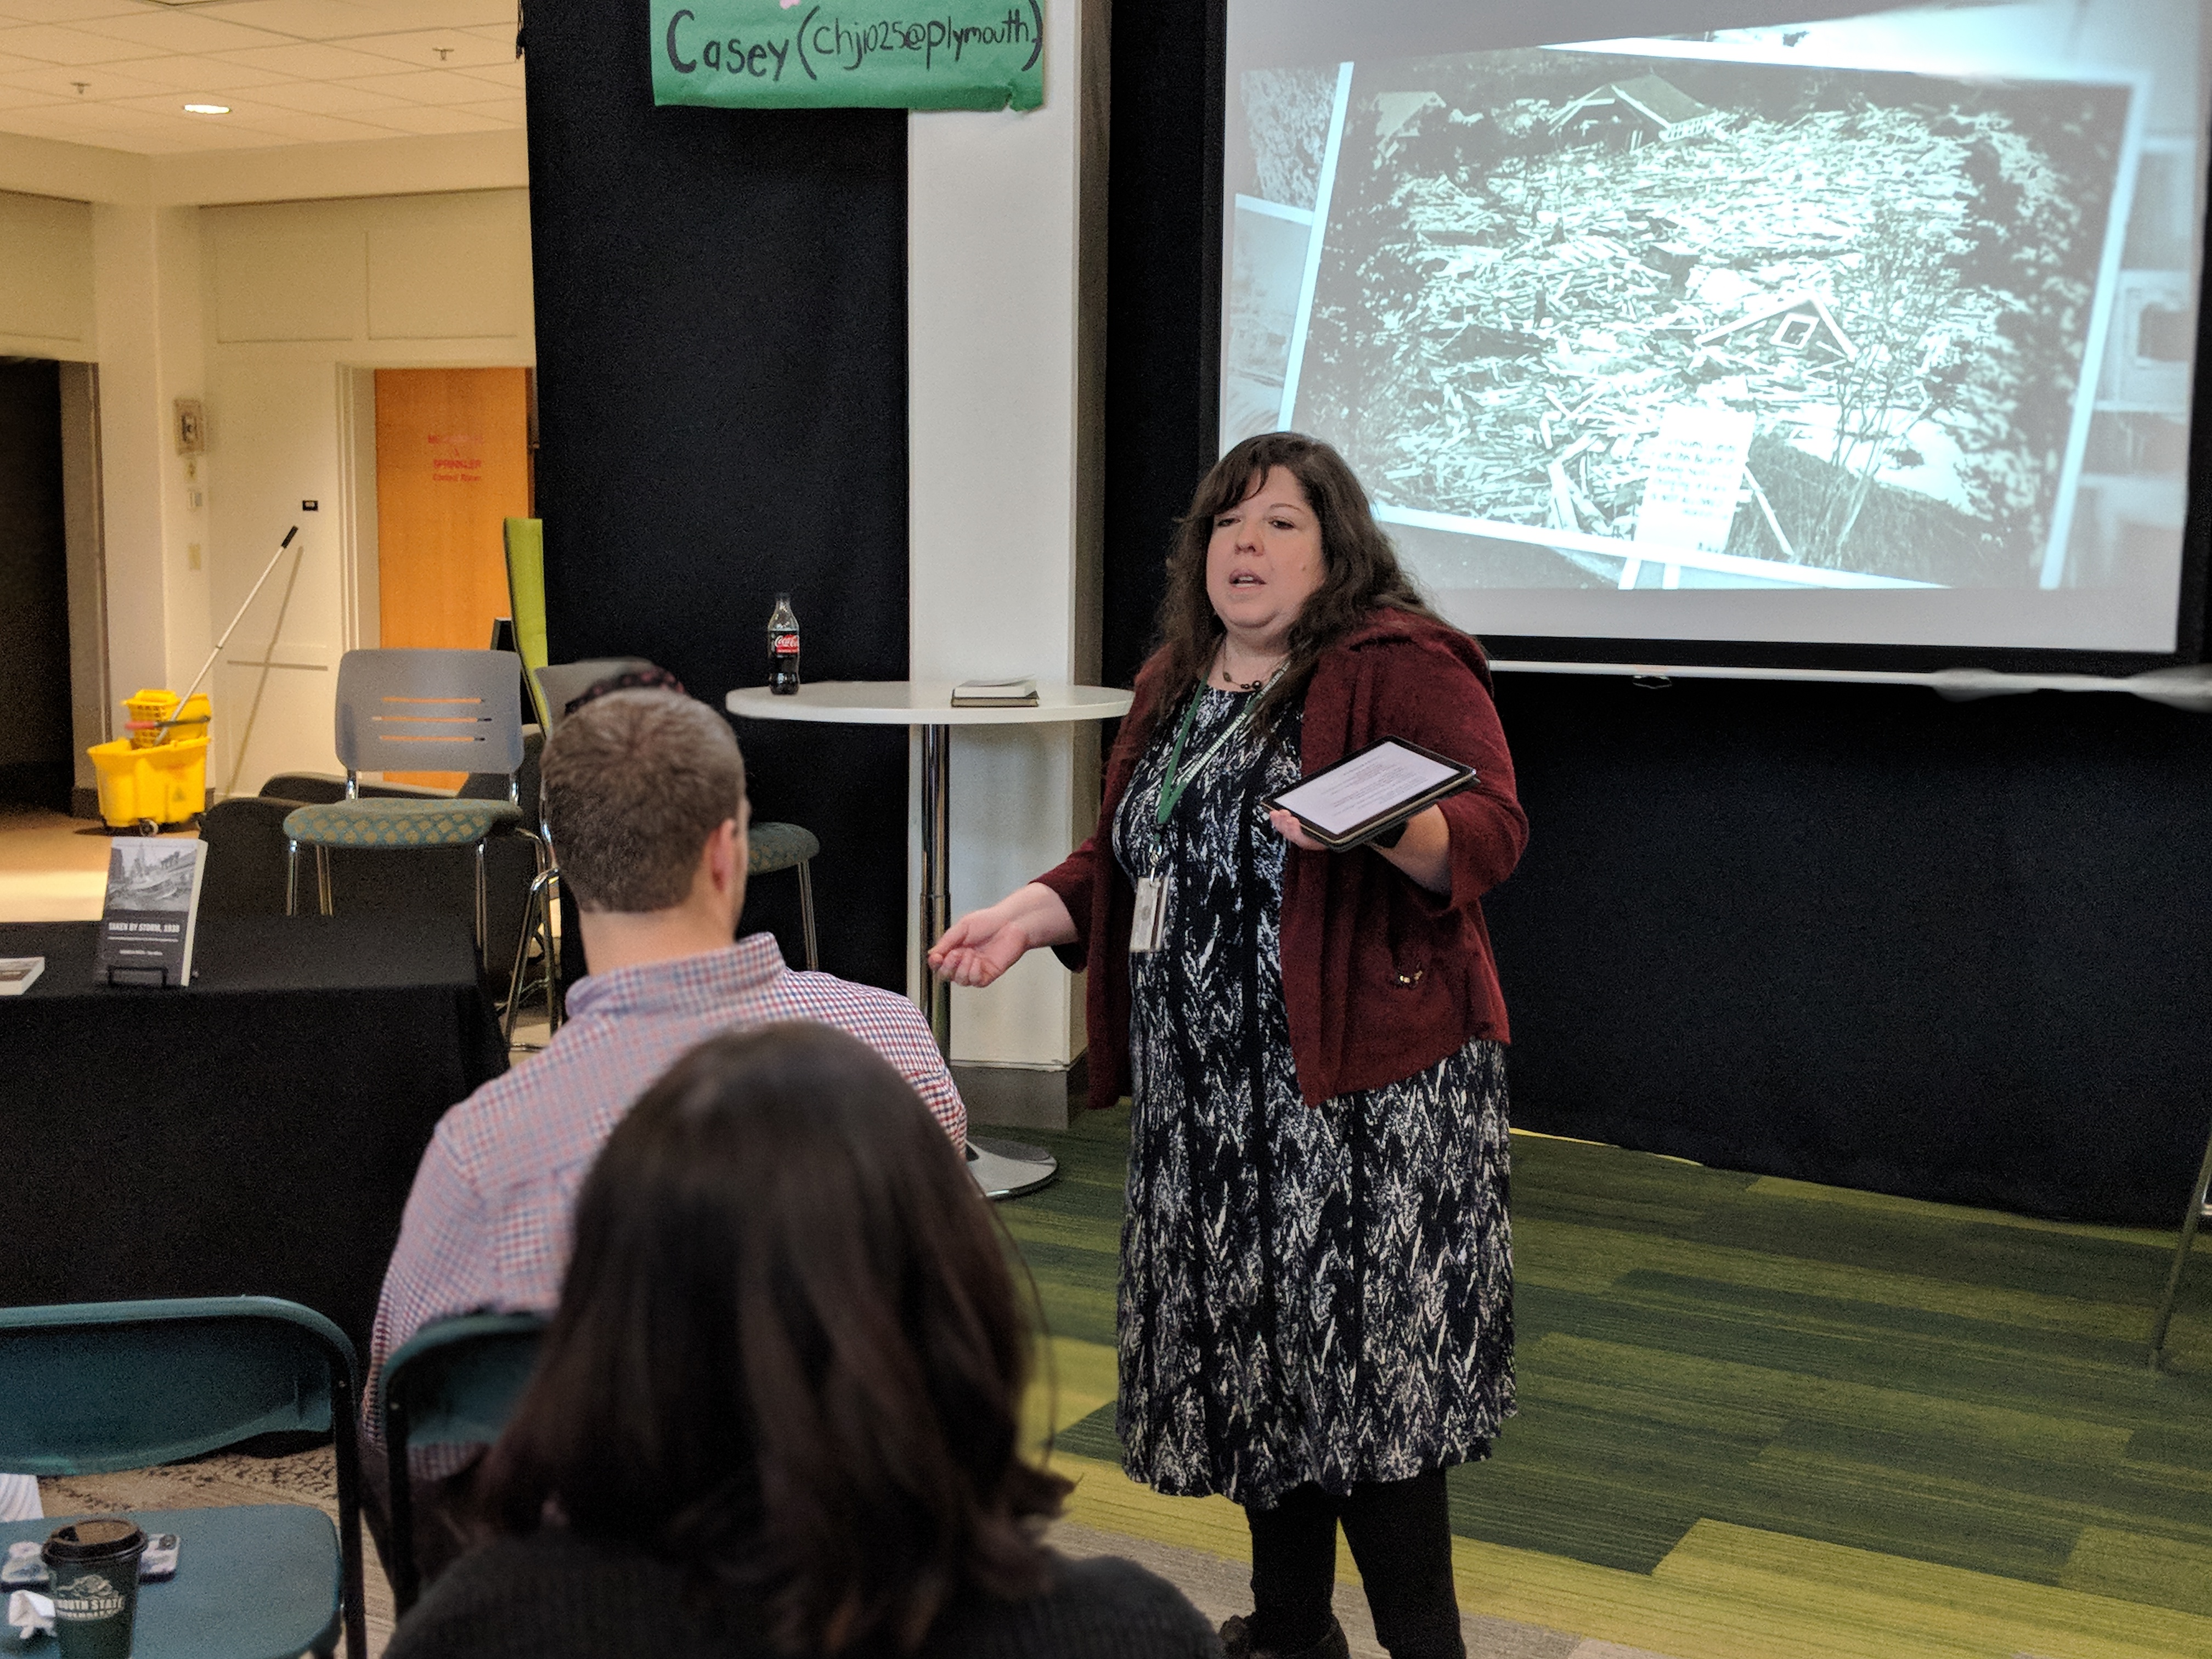 Professor Lourdes Aviles, author of “Taken by Storm,1938: A Social and Meteorological History of the Great New England Hurricane,” hosted a book reading & signing on the 80th anniversary of the historical event.